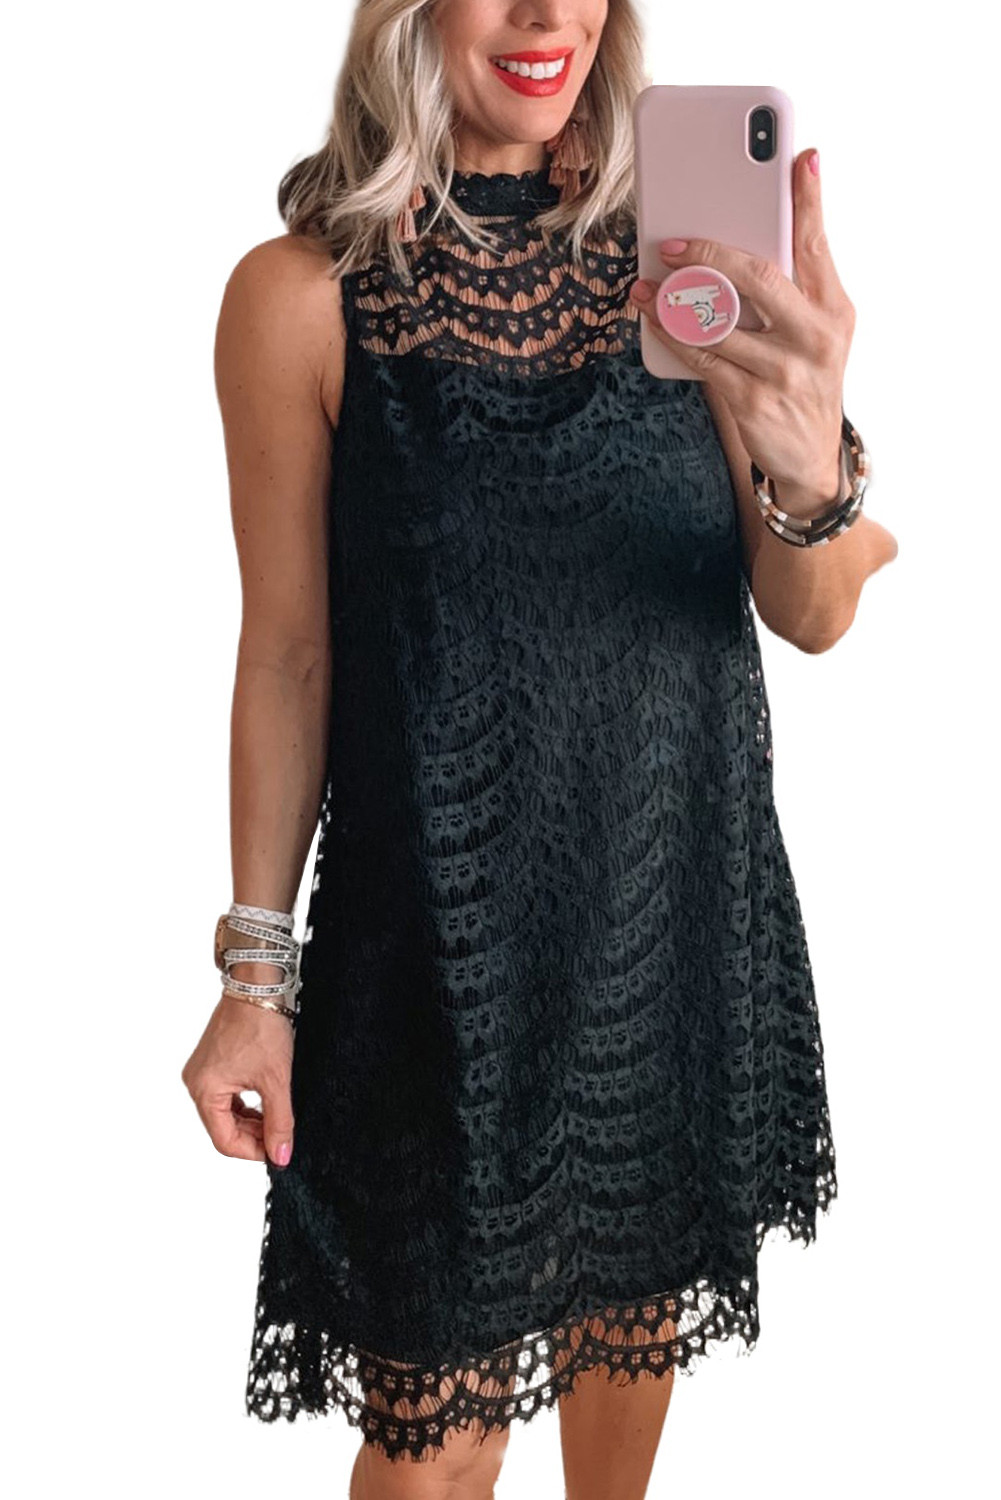 Wholesale Other Category, Cheap Black Lace Sleeveless Mini Dress Online